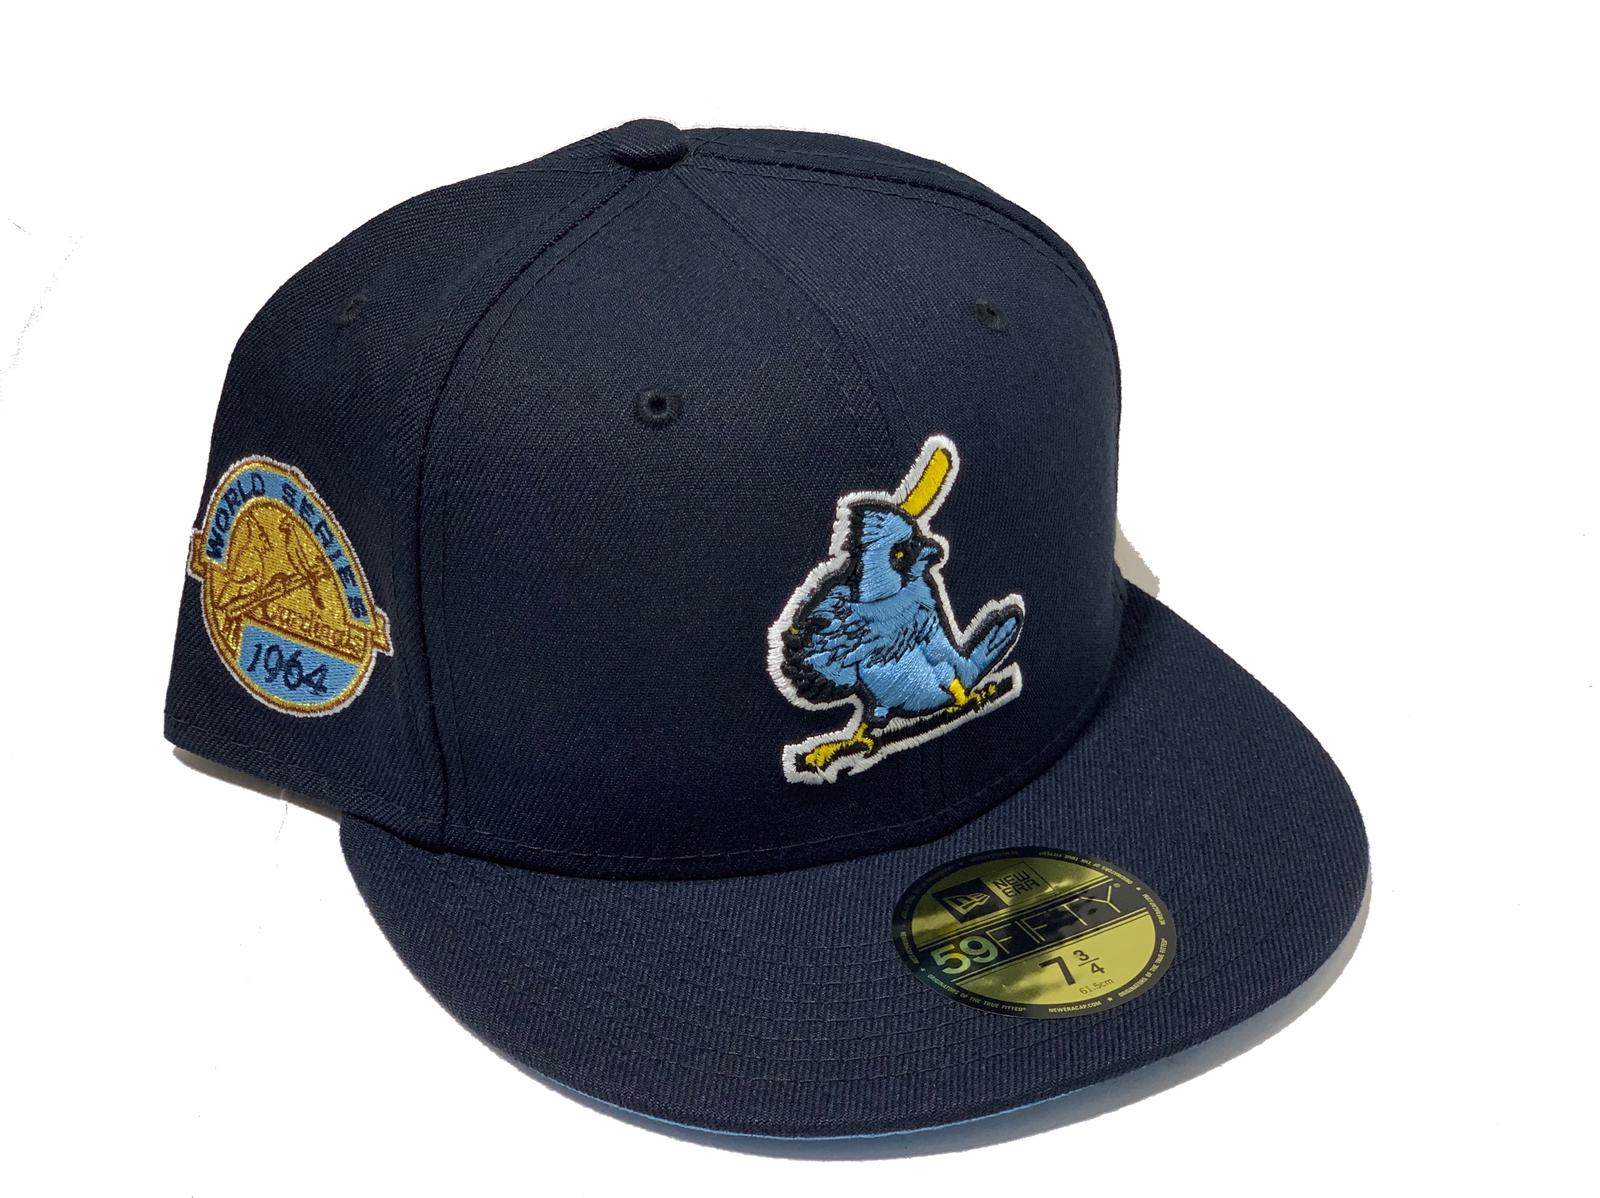 New Era St. Louis Cardinals World Series 1964 Glacier Blue Edition 59Fifty  Fitted Cap